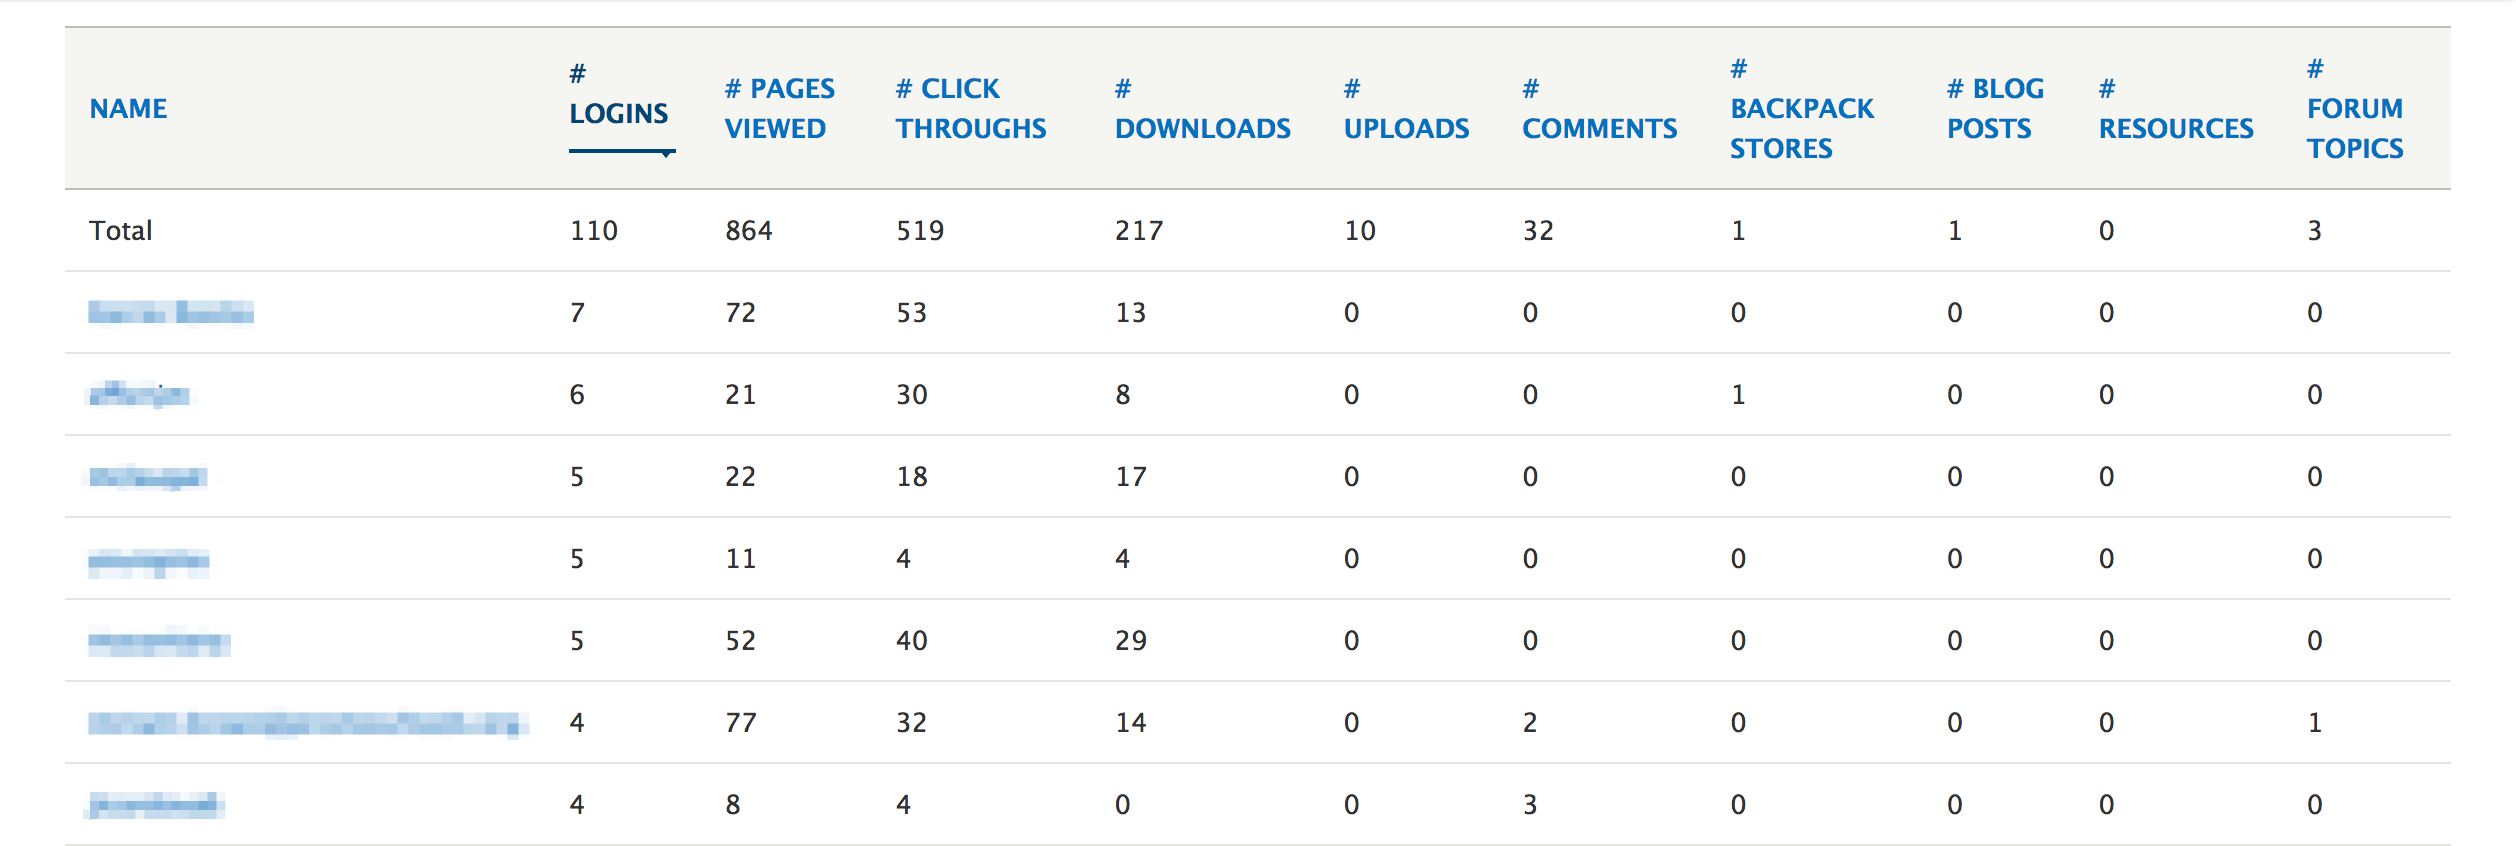 Table showing behavioral stats of website users, including downloads made, forum topics started and comments left.